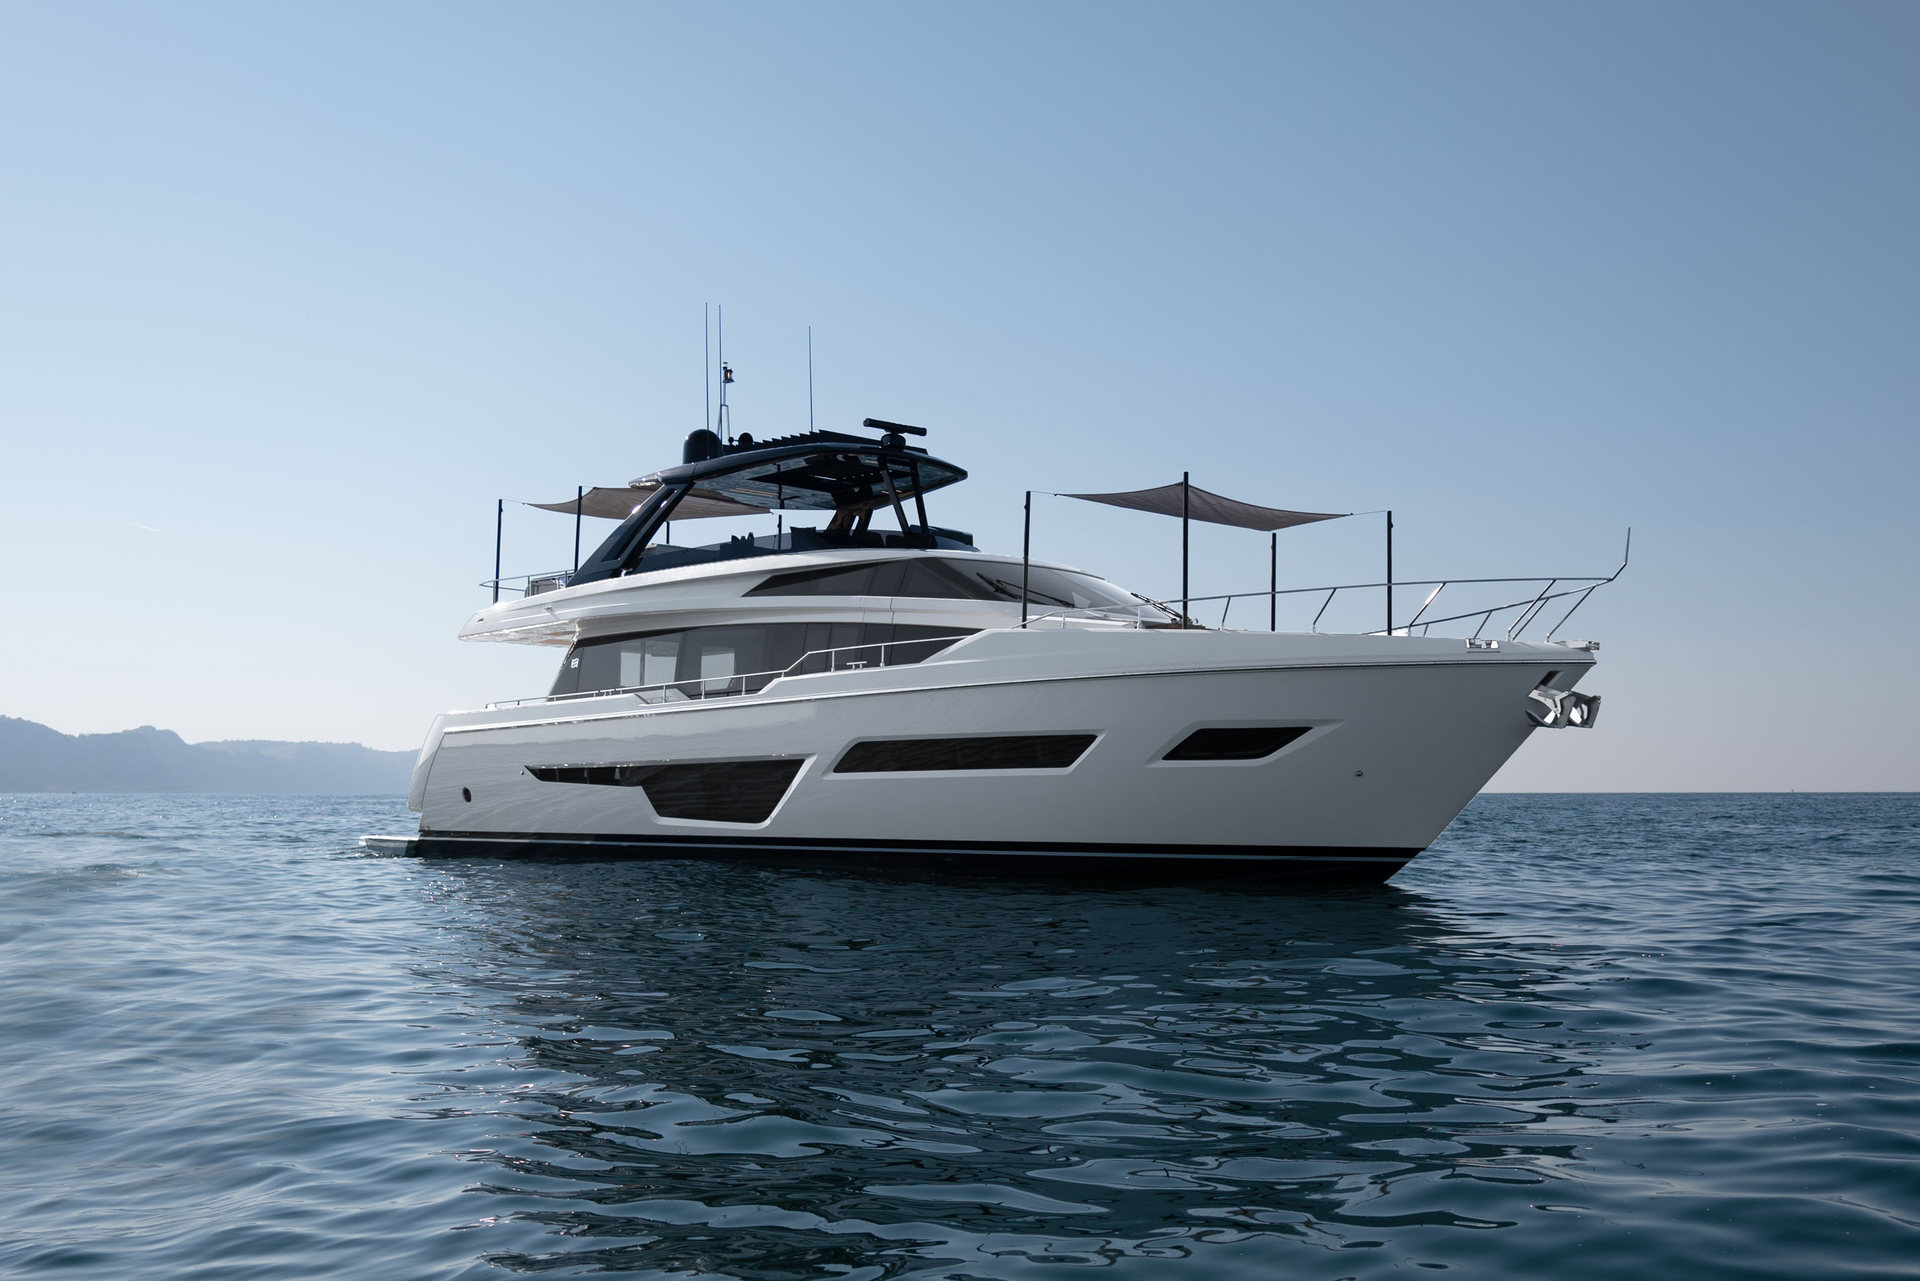 360 VR Virtual Tours of the Ferretti Yachts 780